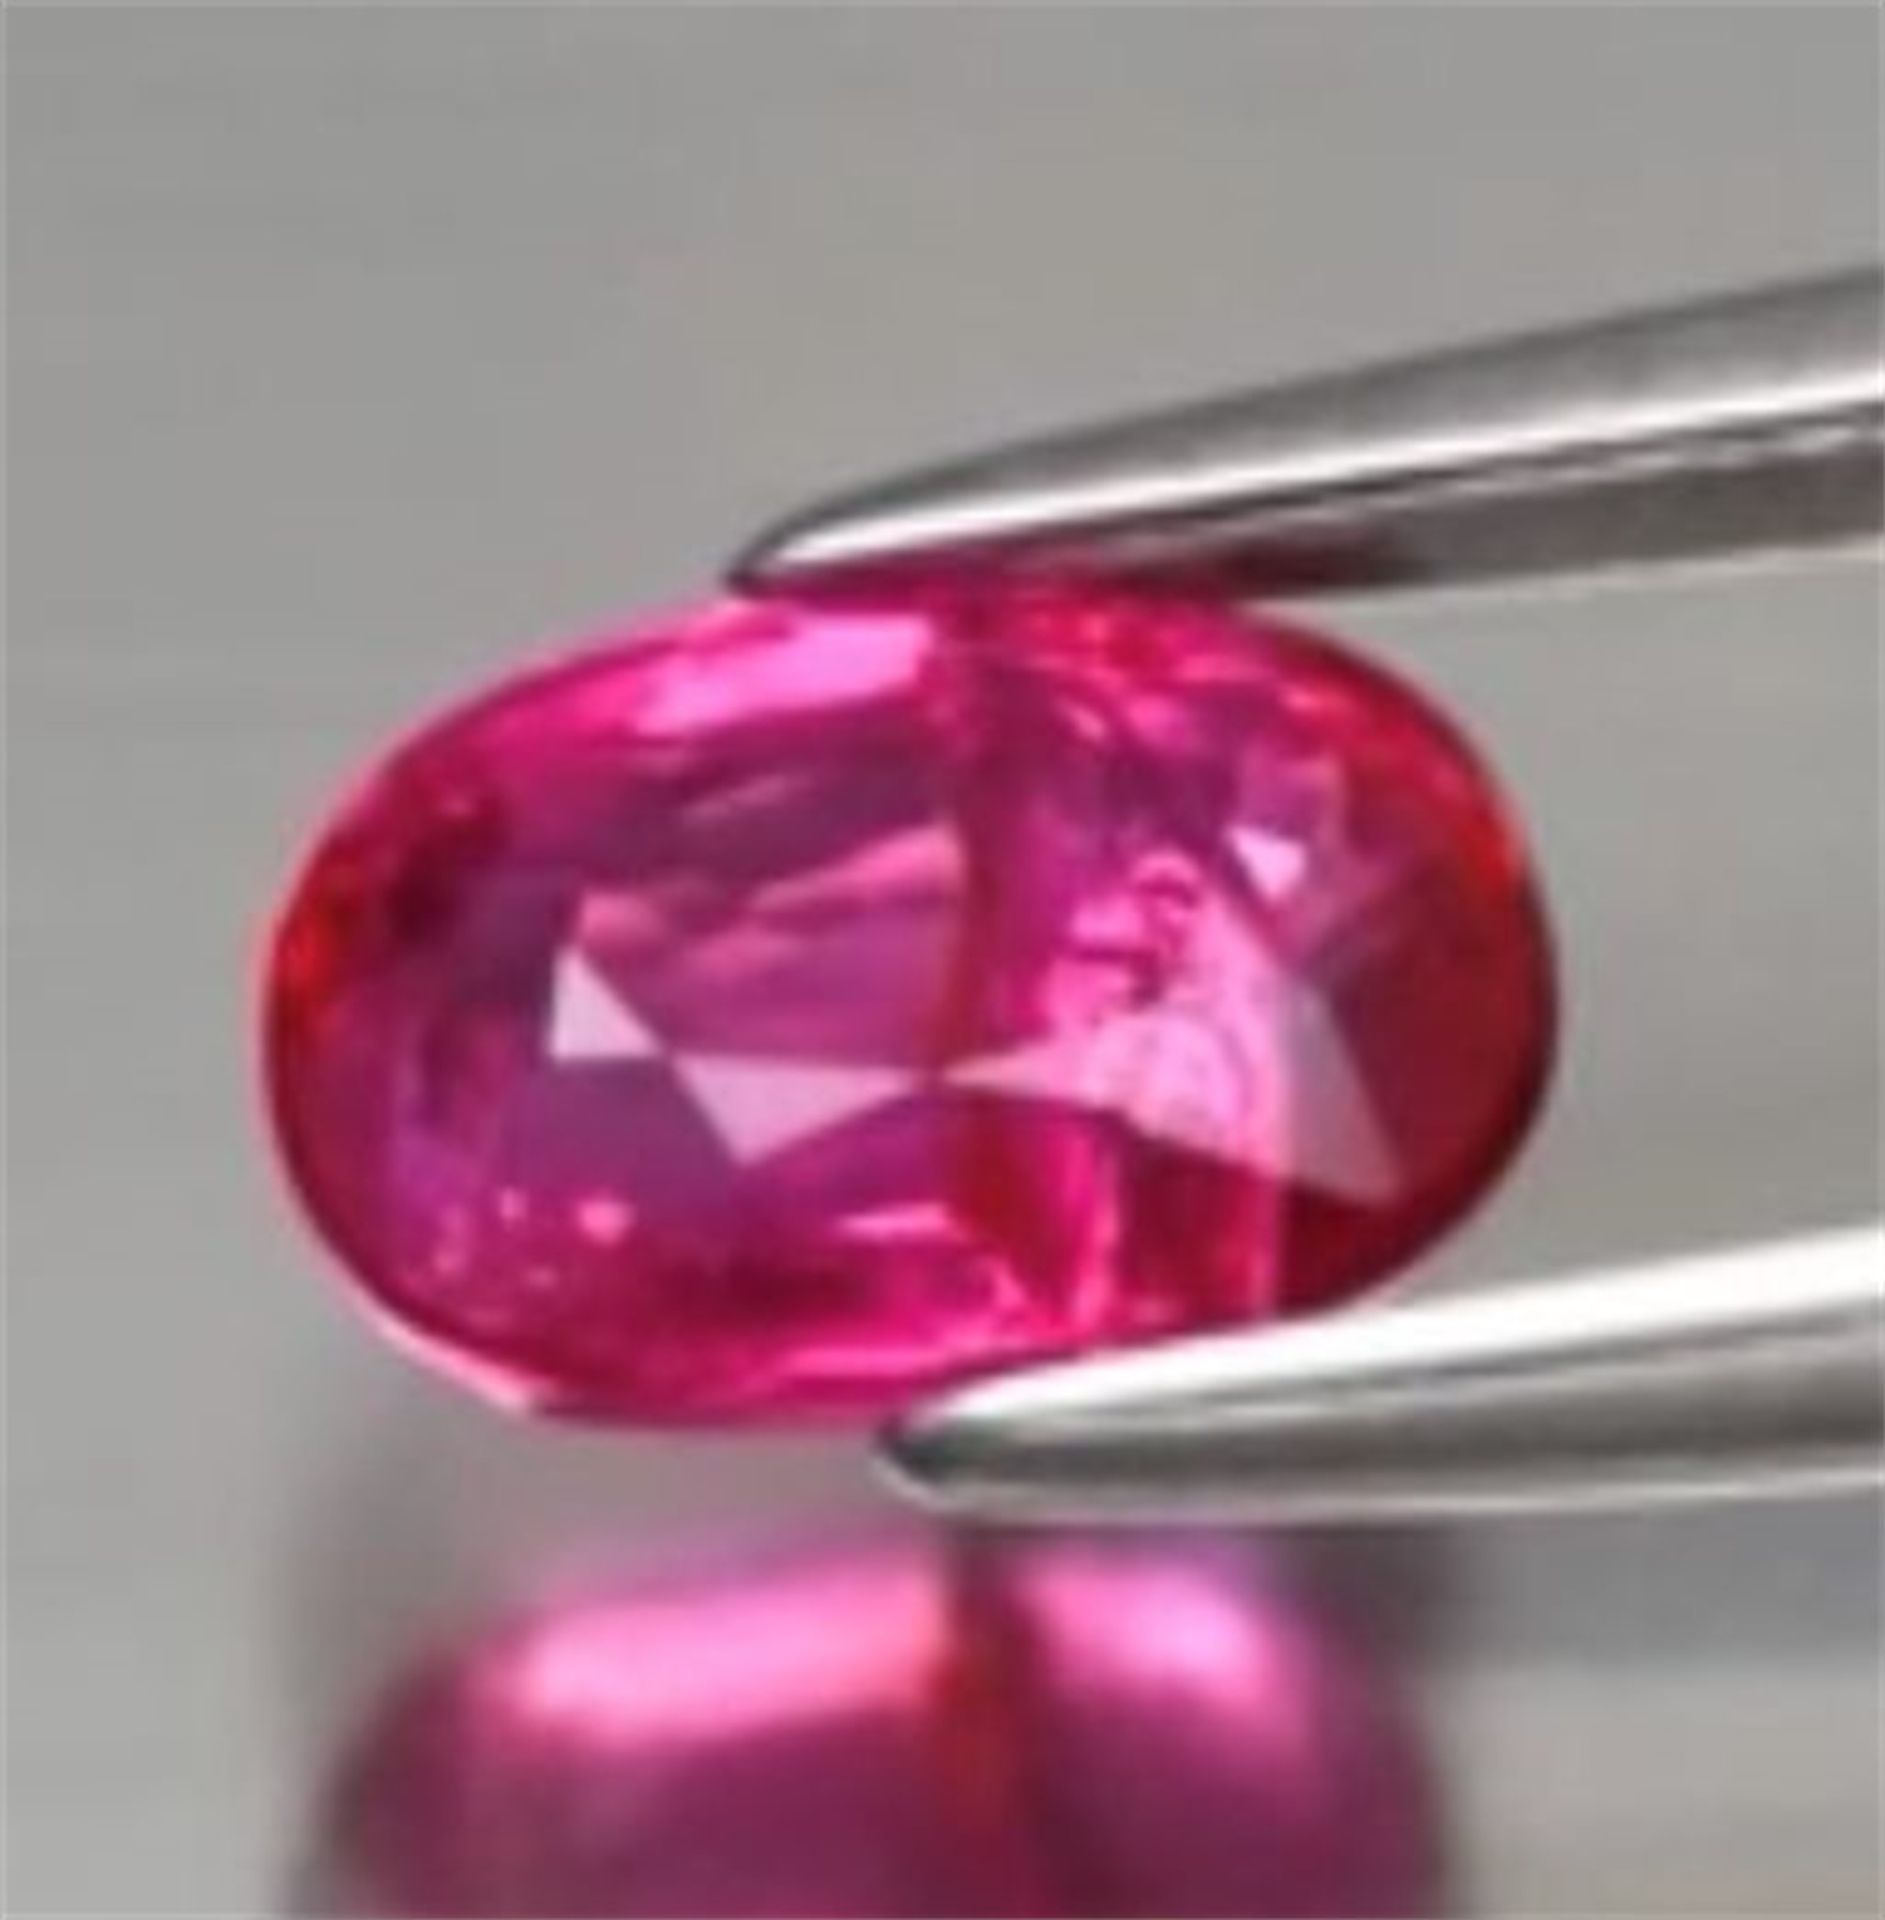 LOTUS Certified 0.99 ct. Hot Pink Sapphire MOZAMBIQUE - Image 4 of 10